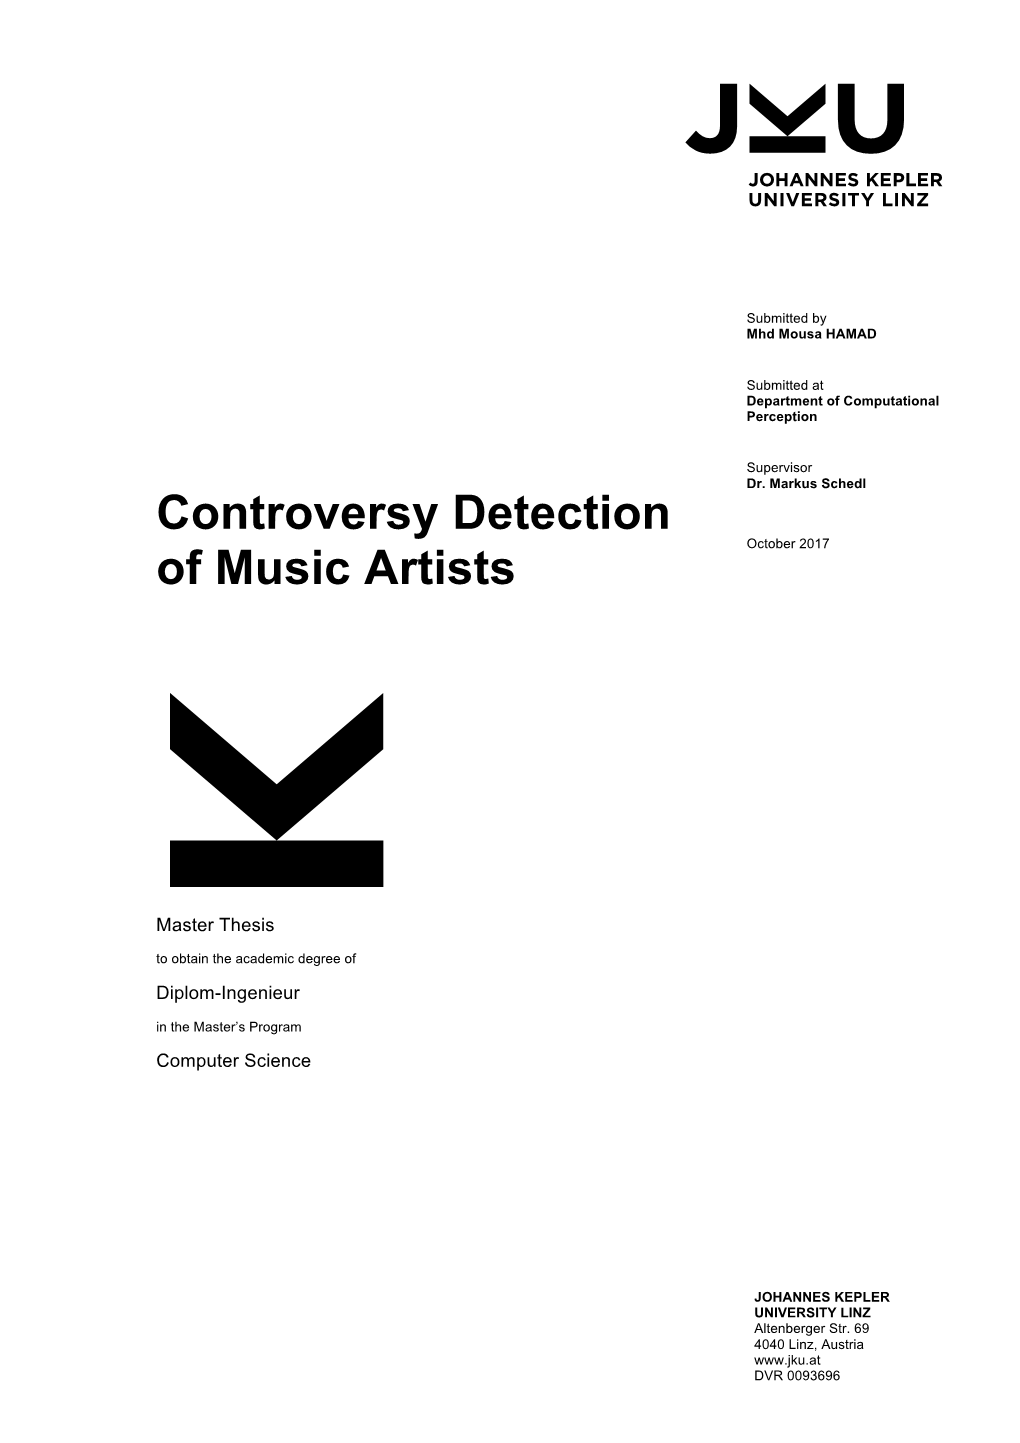 Controversy Detection of Music Artists